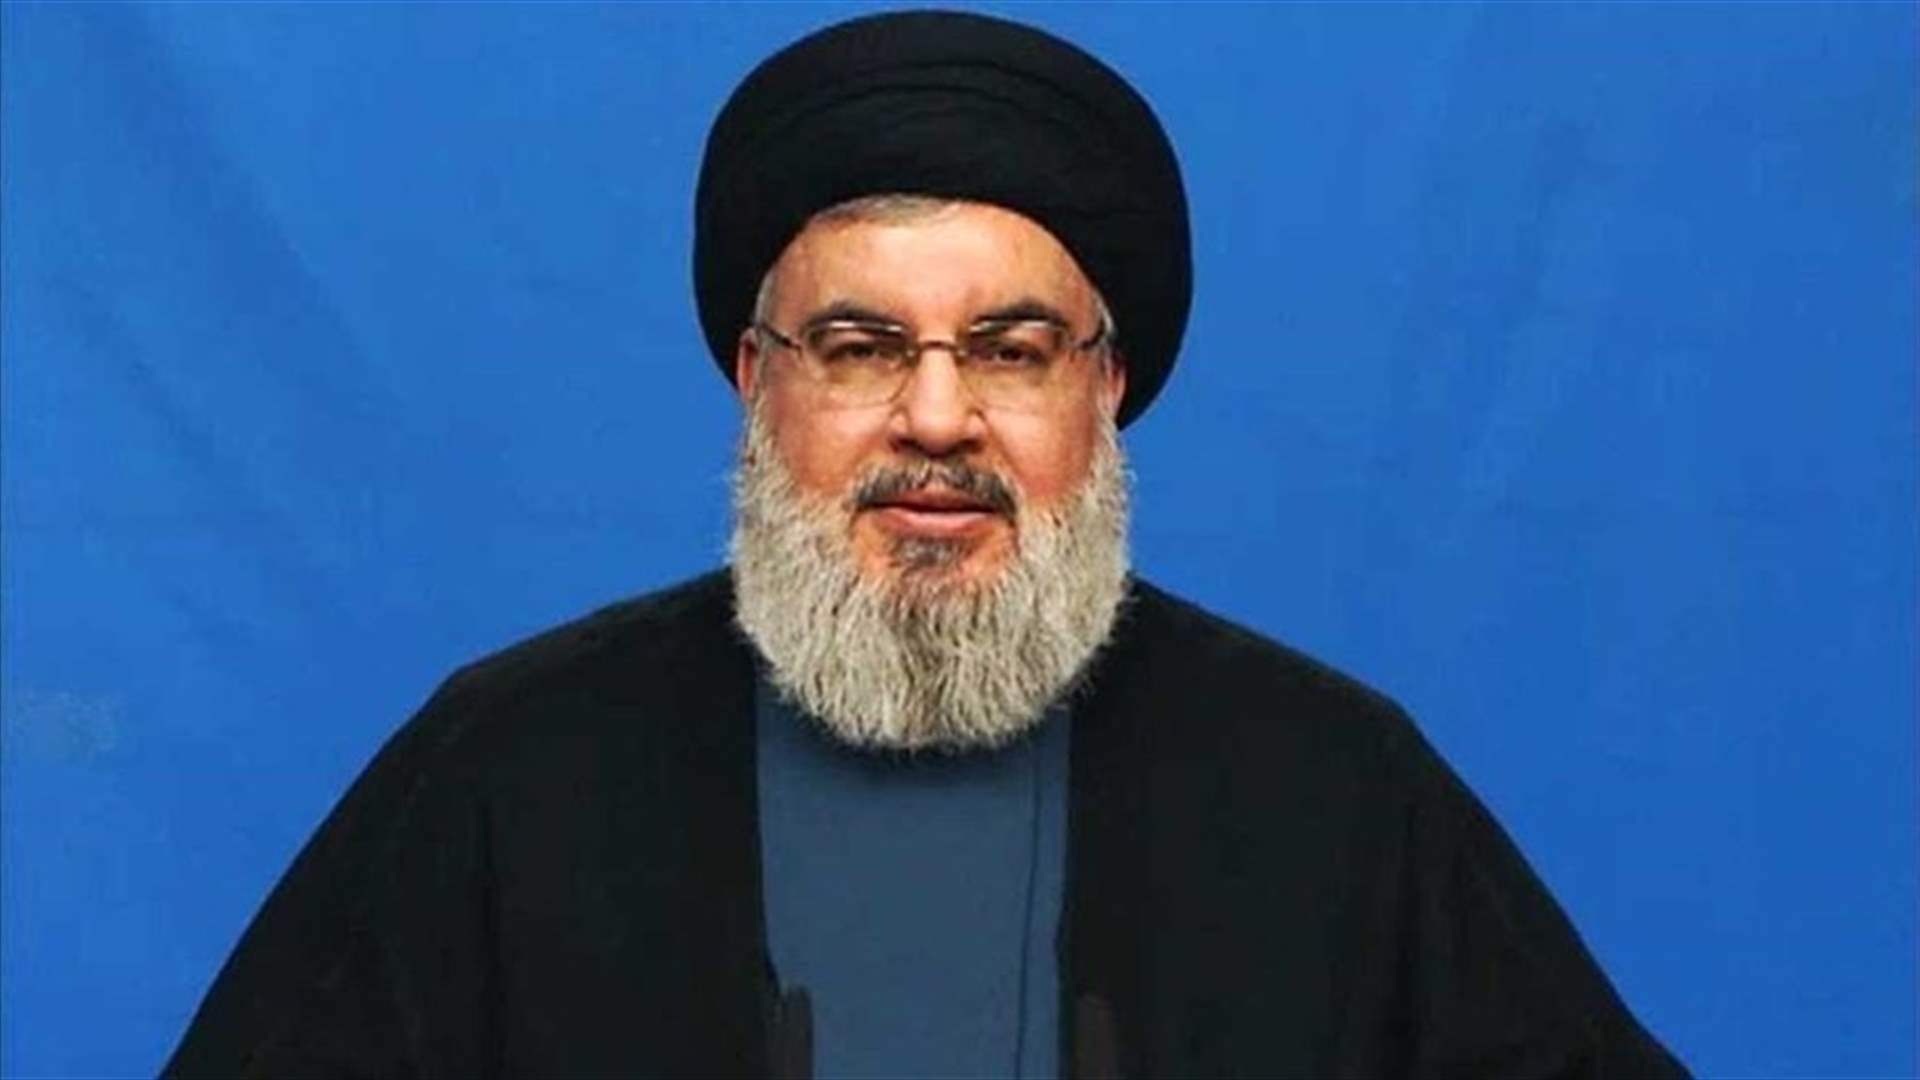 Hezbollah&#39;s Nasrallah: Southern Lebanon&#39;s role from the start has been to support Gaza